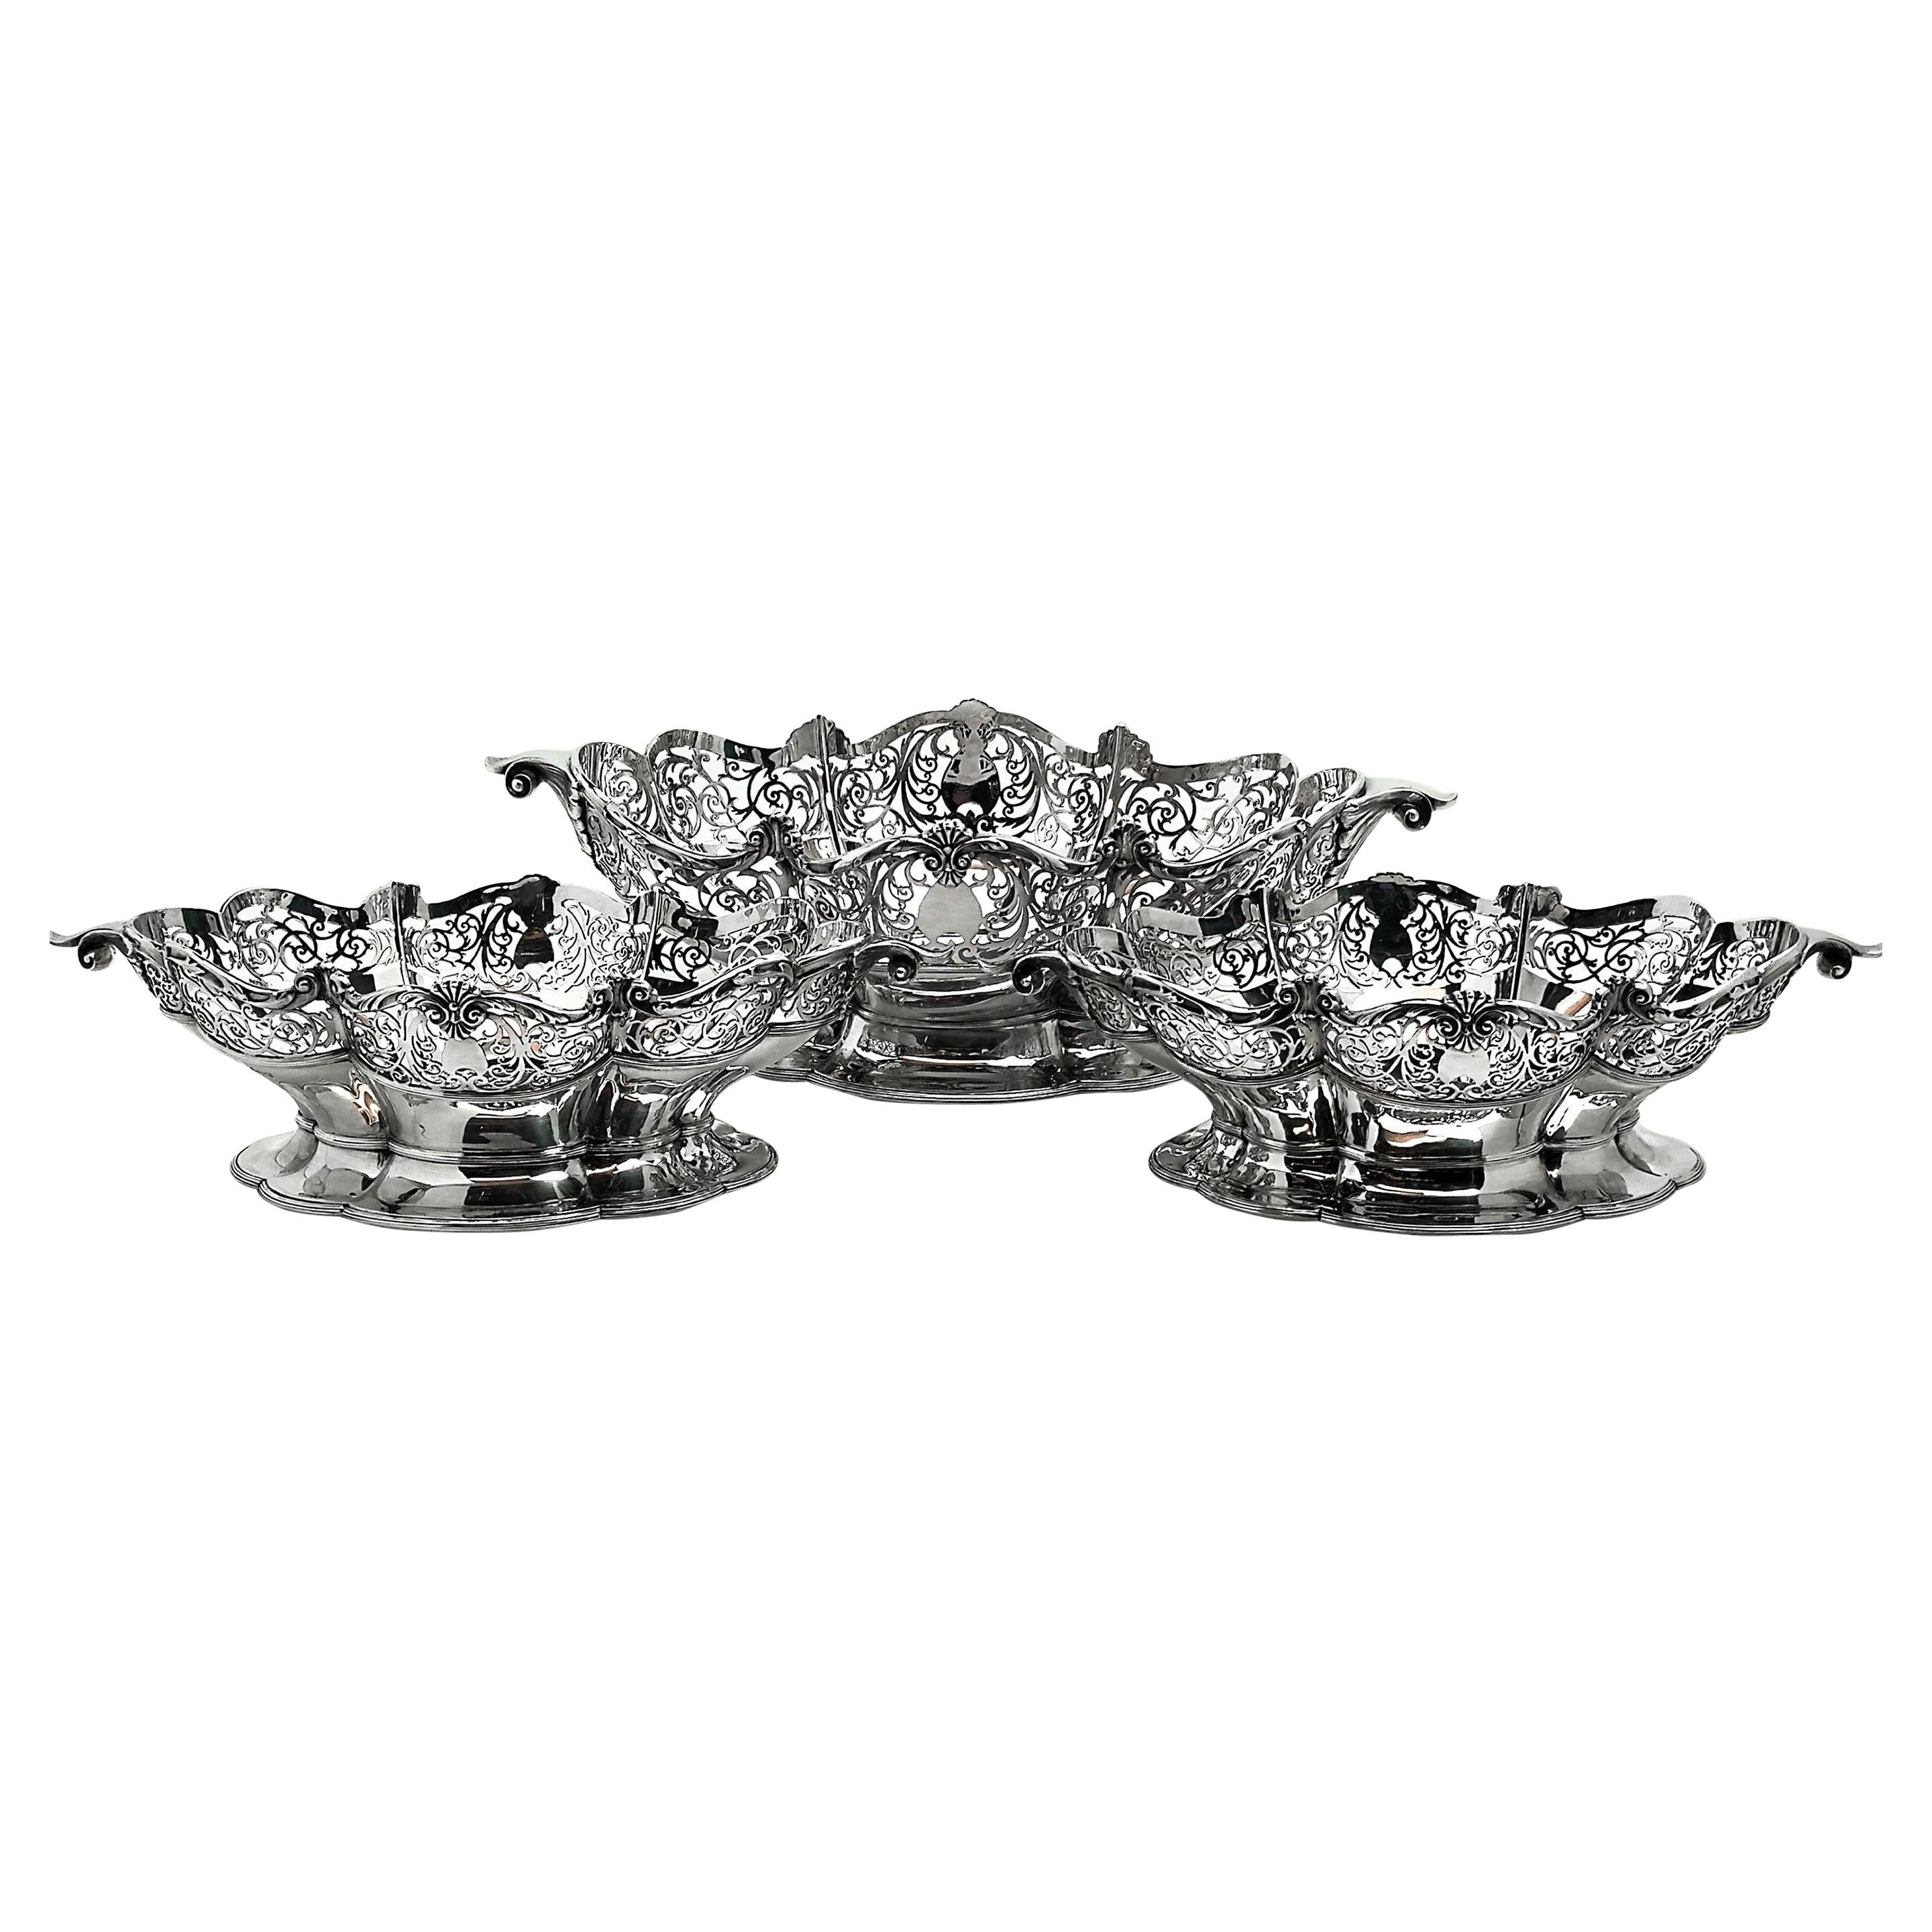 Suite of 3 Sterling Silver Baskets / Dishes Sheffield 1921-1922